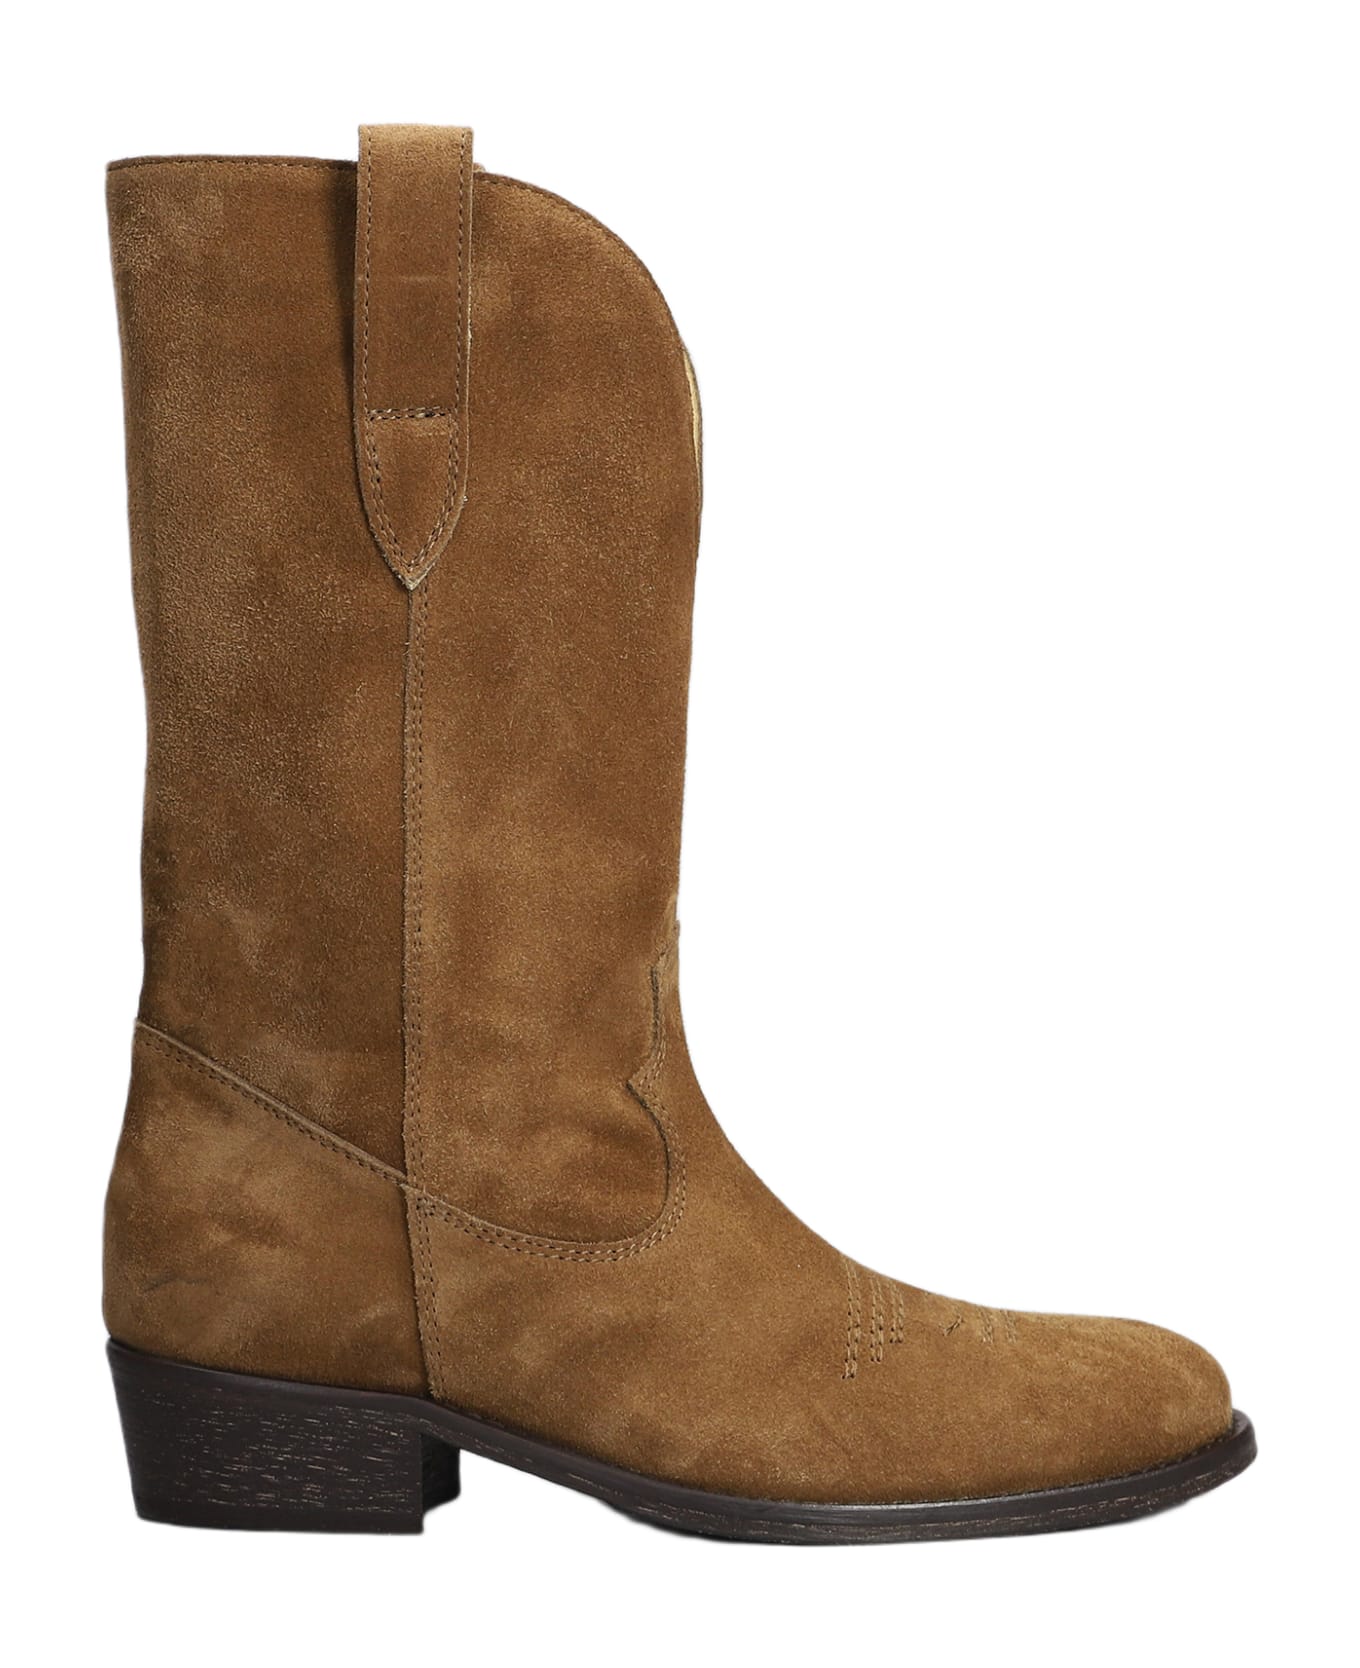 Via Roma 15 Texan Ankle Boots In Leather Color Suede - leather color